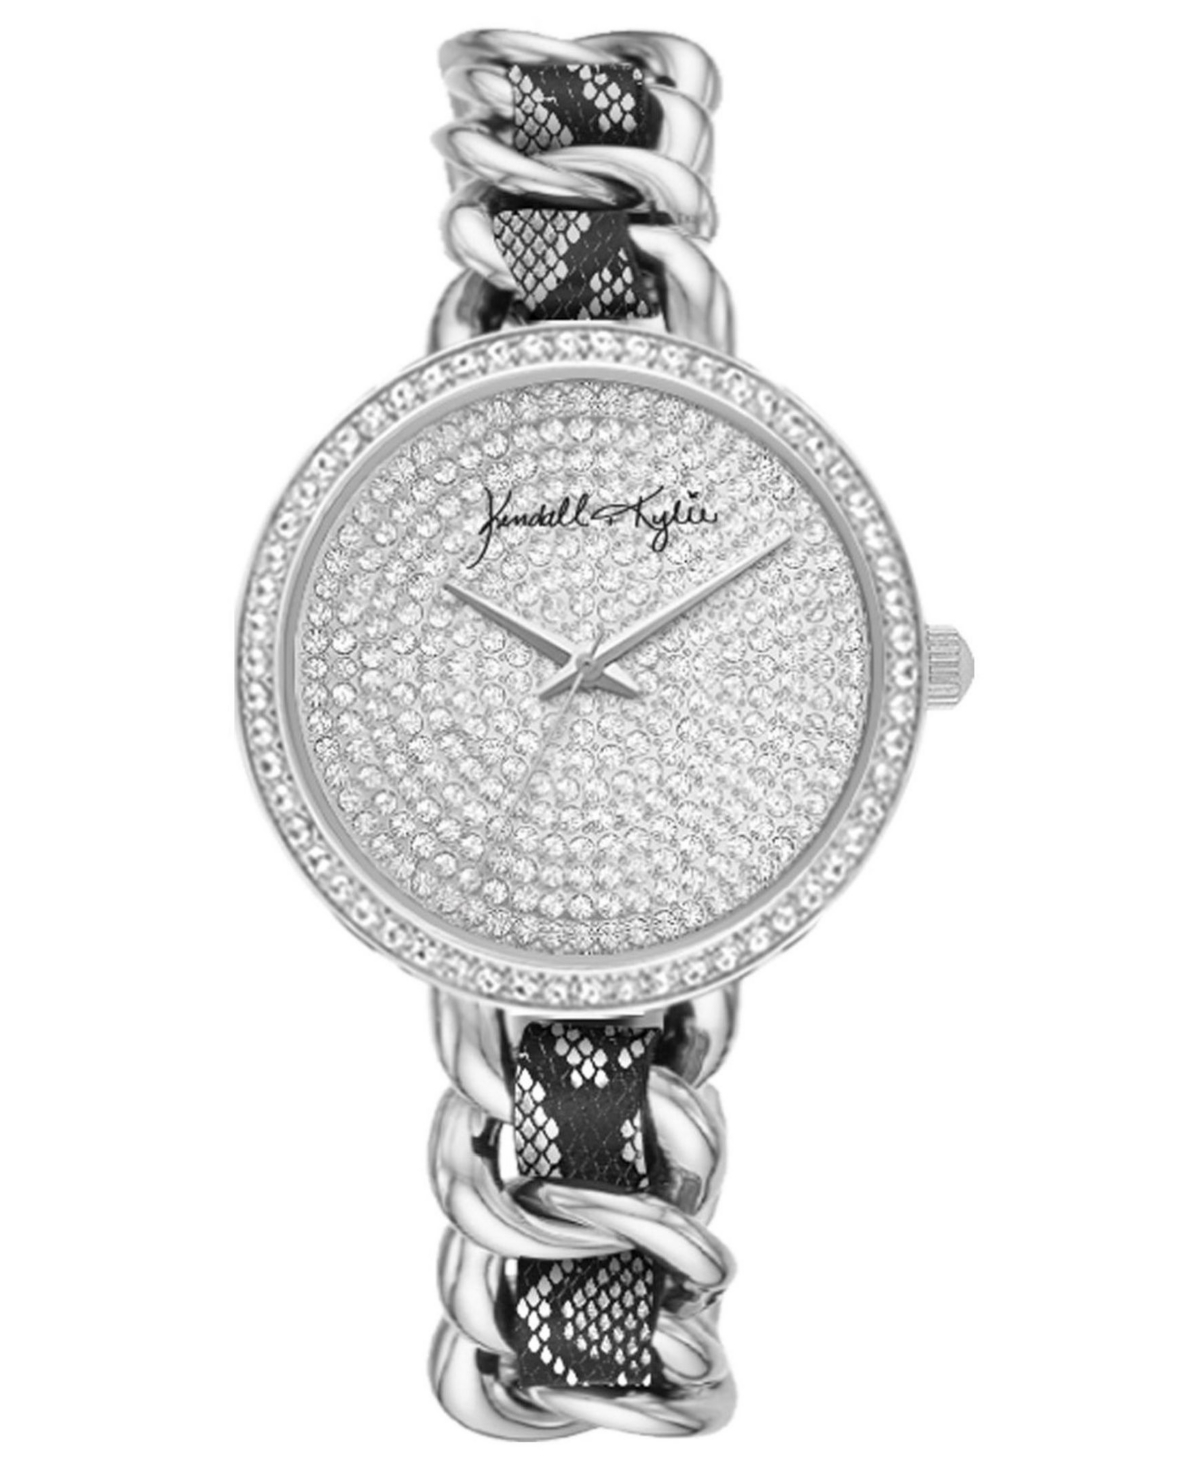 Kendall + Kylie Women's Kendall + Kylie Braided Snakeskin Stainless Steel Strap Analog Watch 40mm